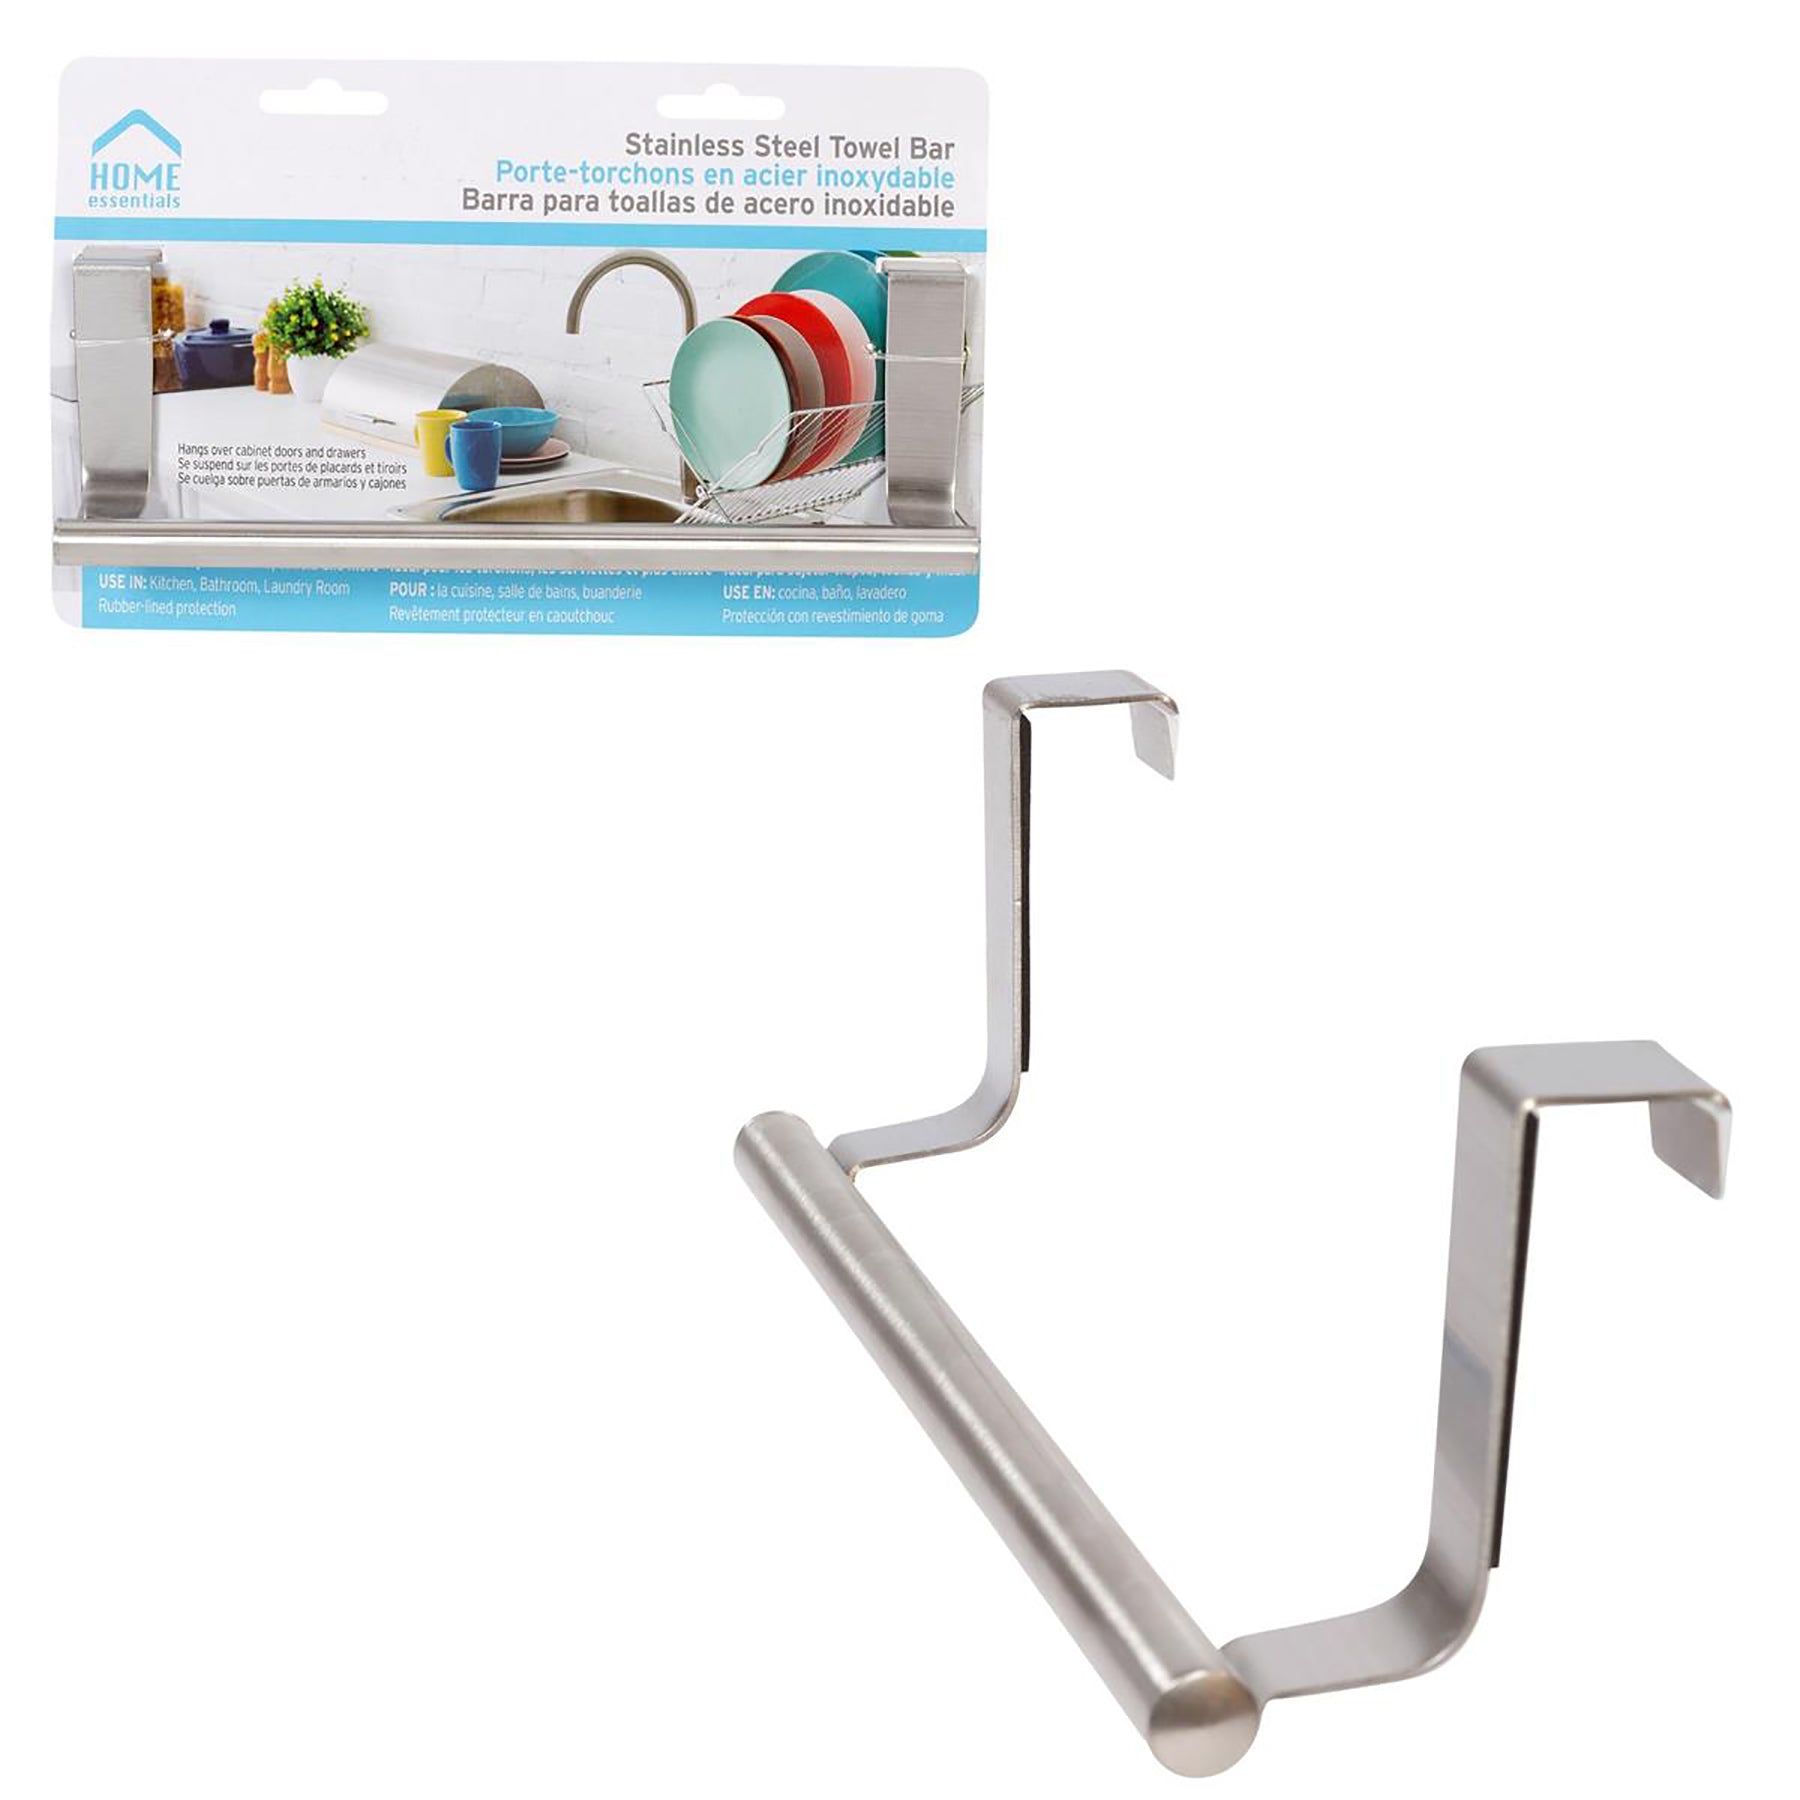 Home Essentials Towel Bar Stainless Steel